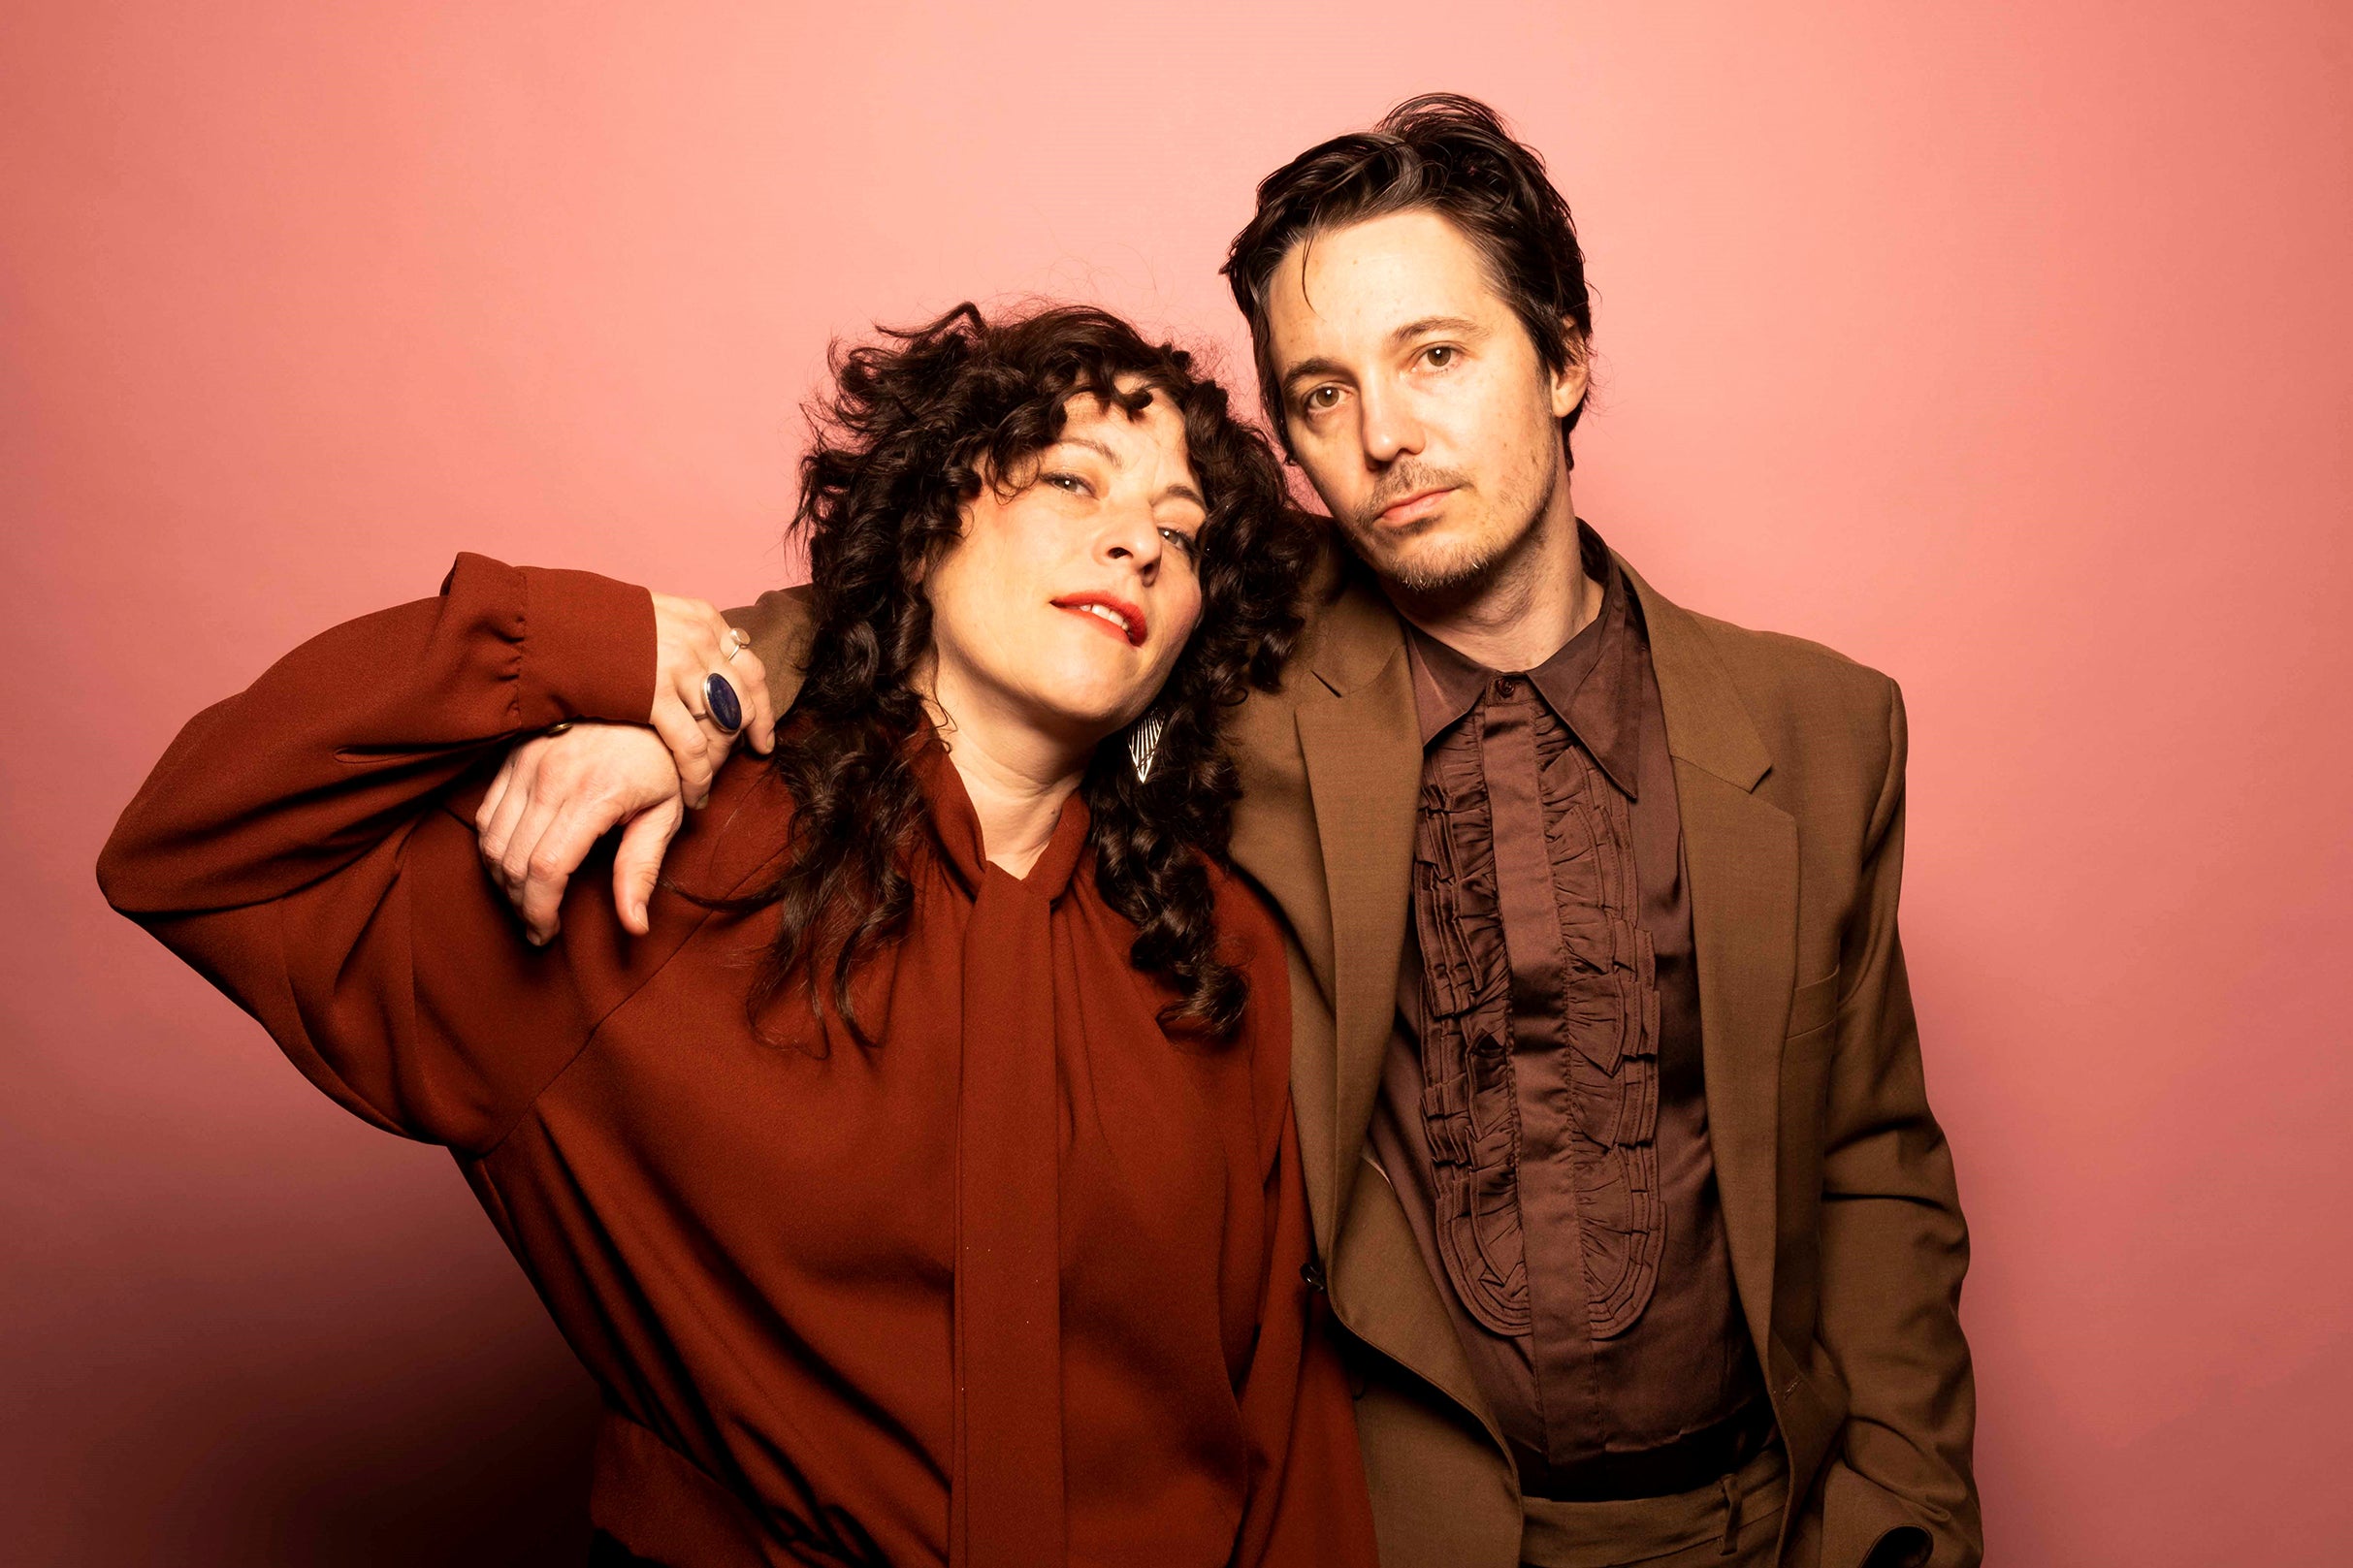 Shovels & Rope in Athens promo photo for Exclusive presale offer code